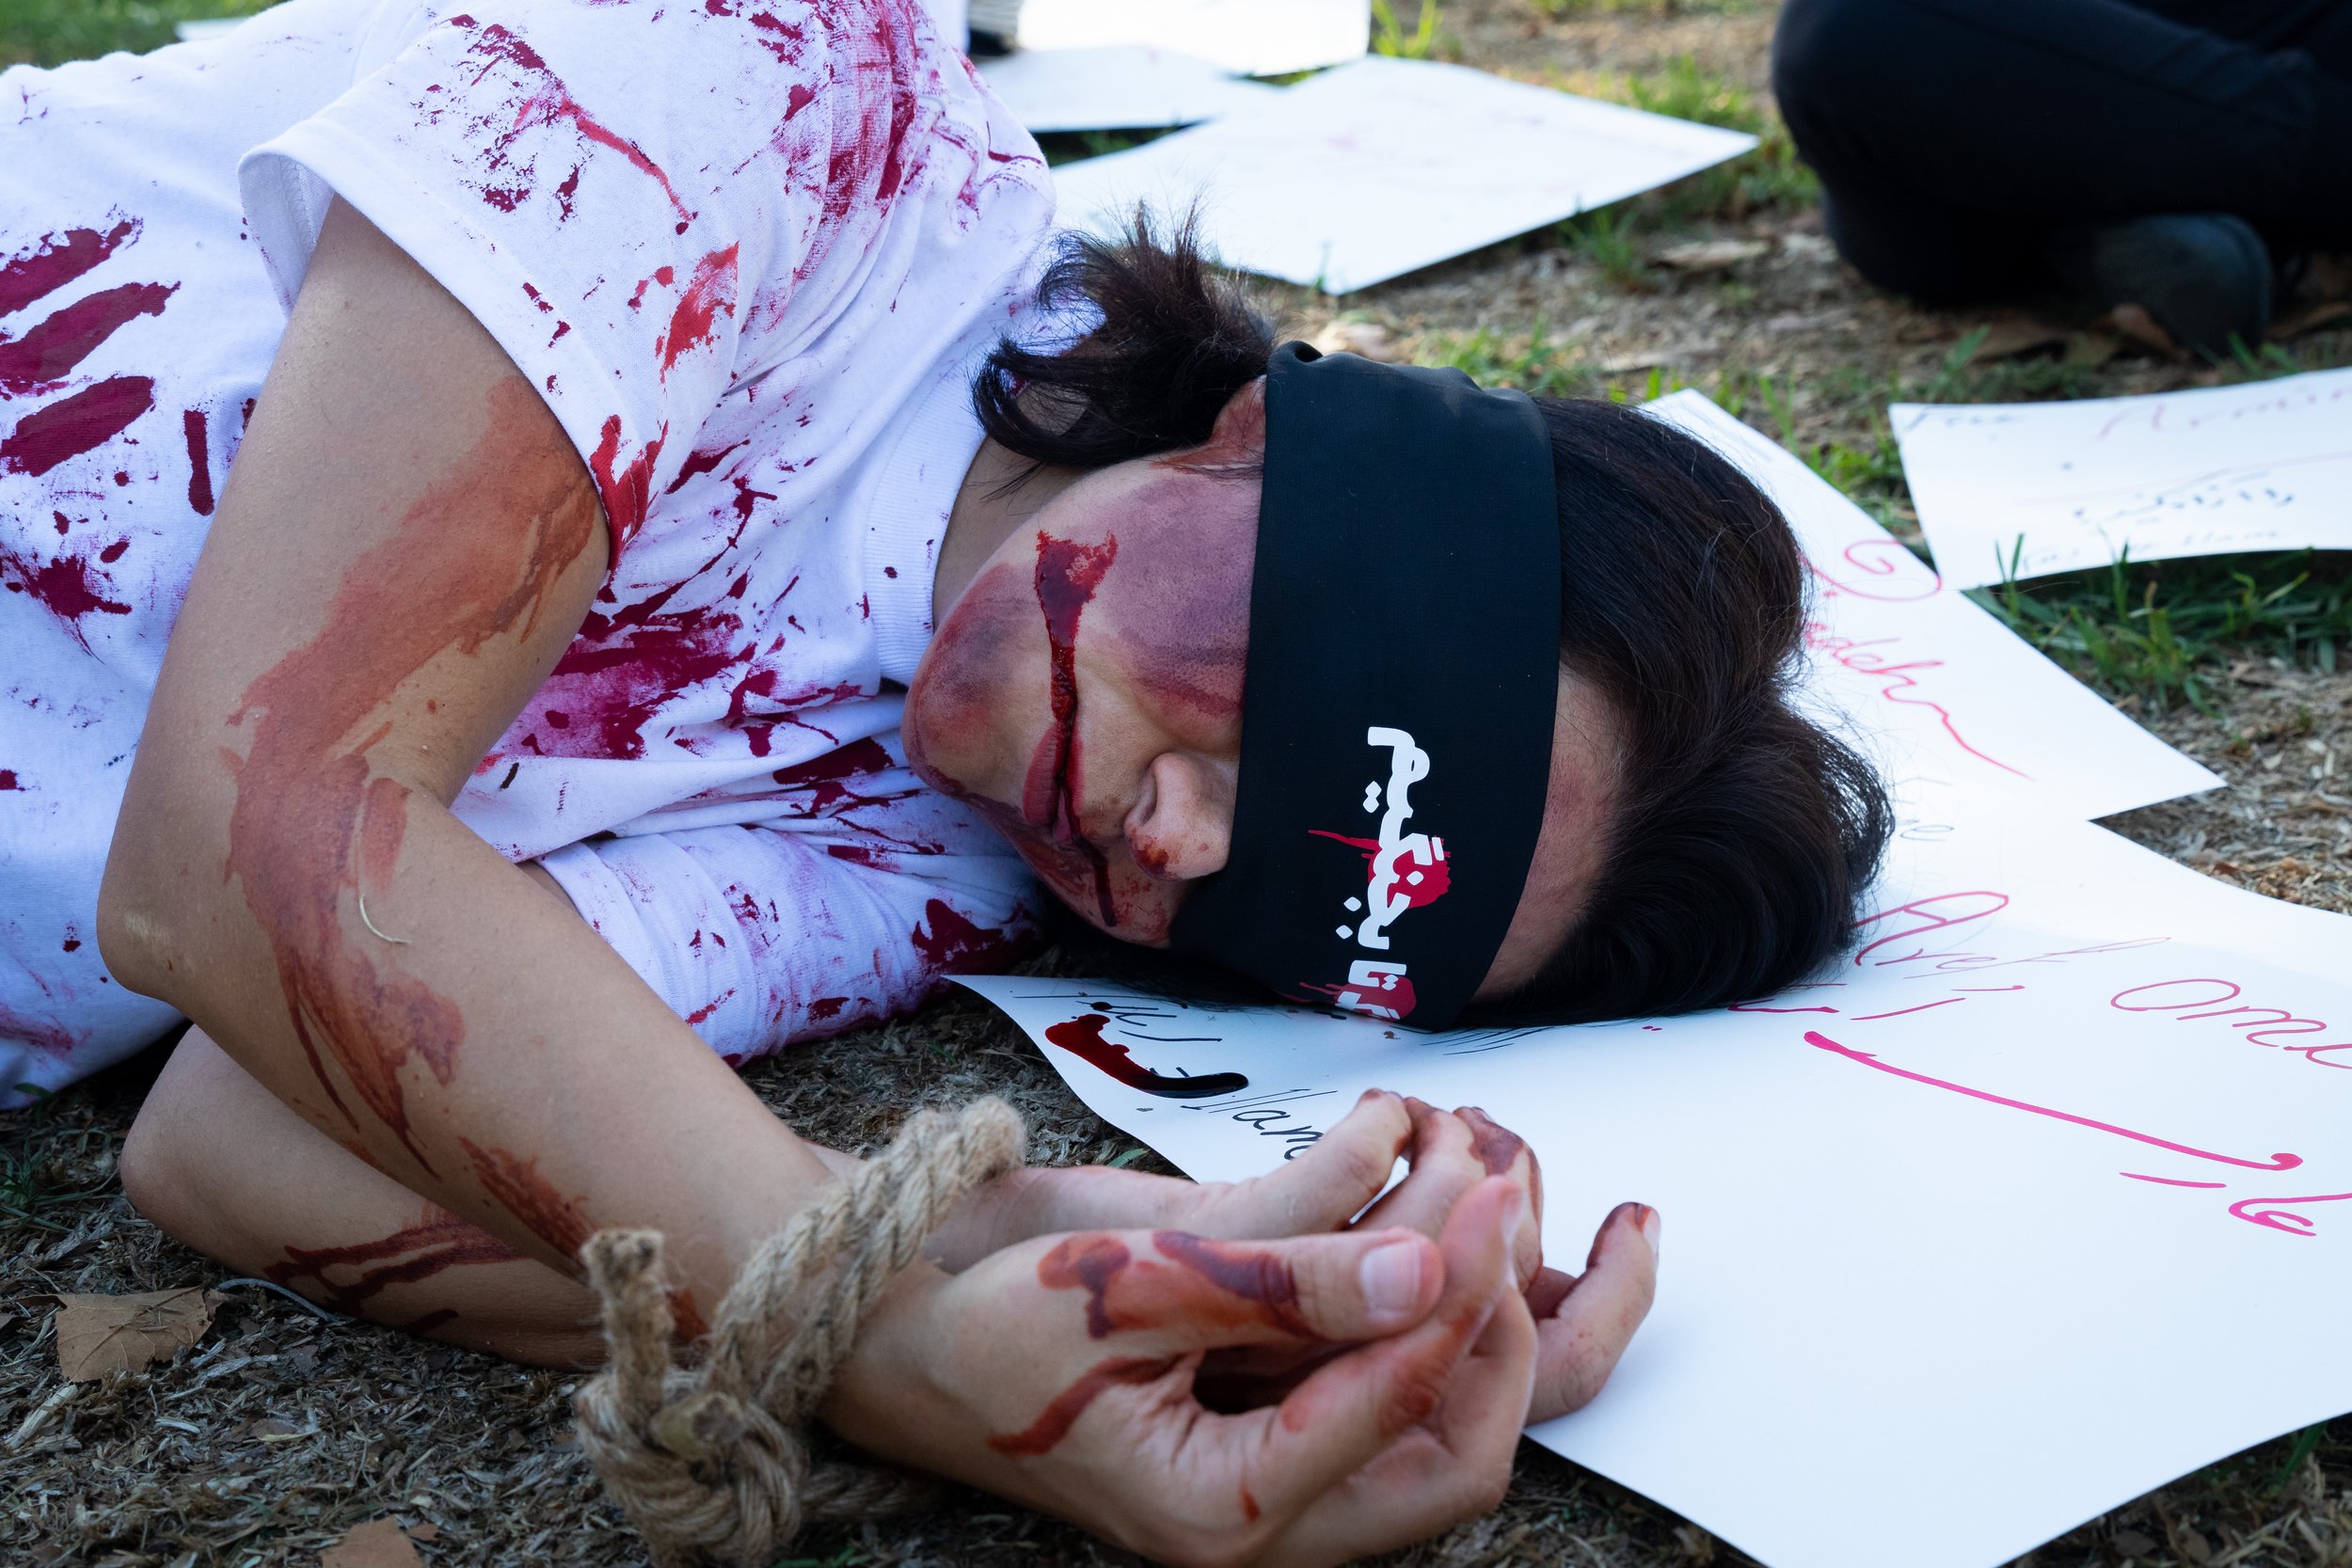  Nikki Vaez performing a die-in in honor of those murdered and imprisoned in Iran. This performance was during the Freedom for Iran human chain in Glendale, Calif., on Saturday, Oct. 29, 2022, as part of a global action. (Caylo Seals | The Corsair) 